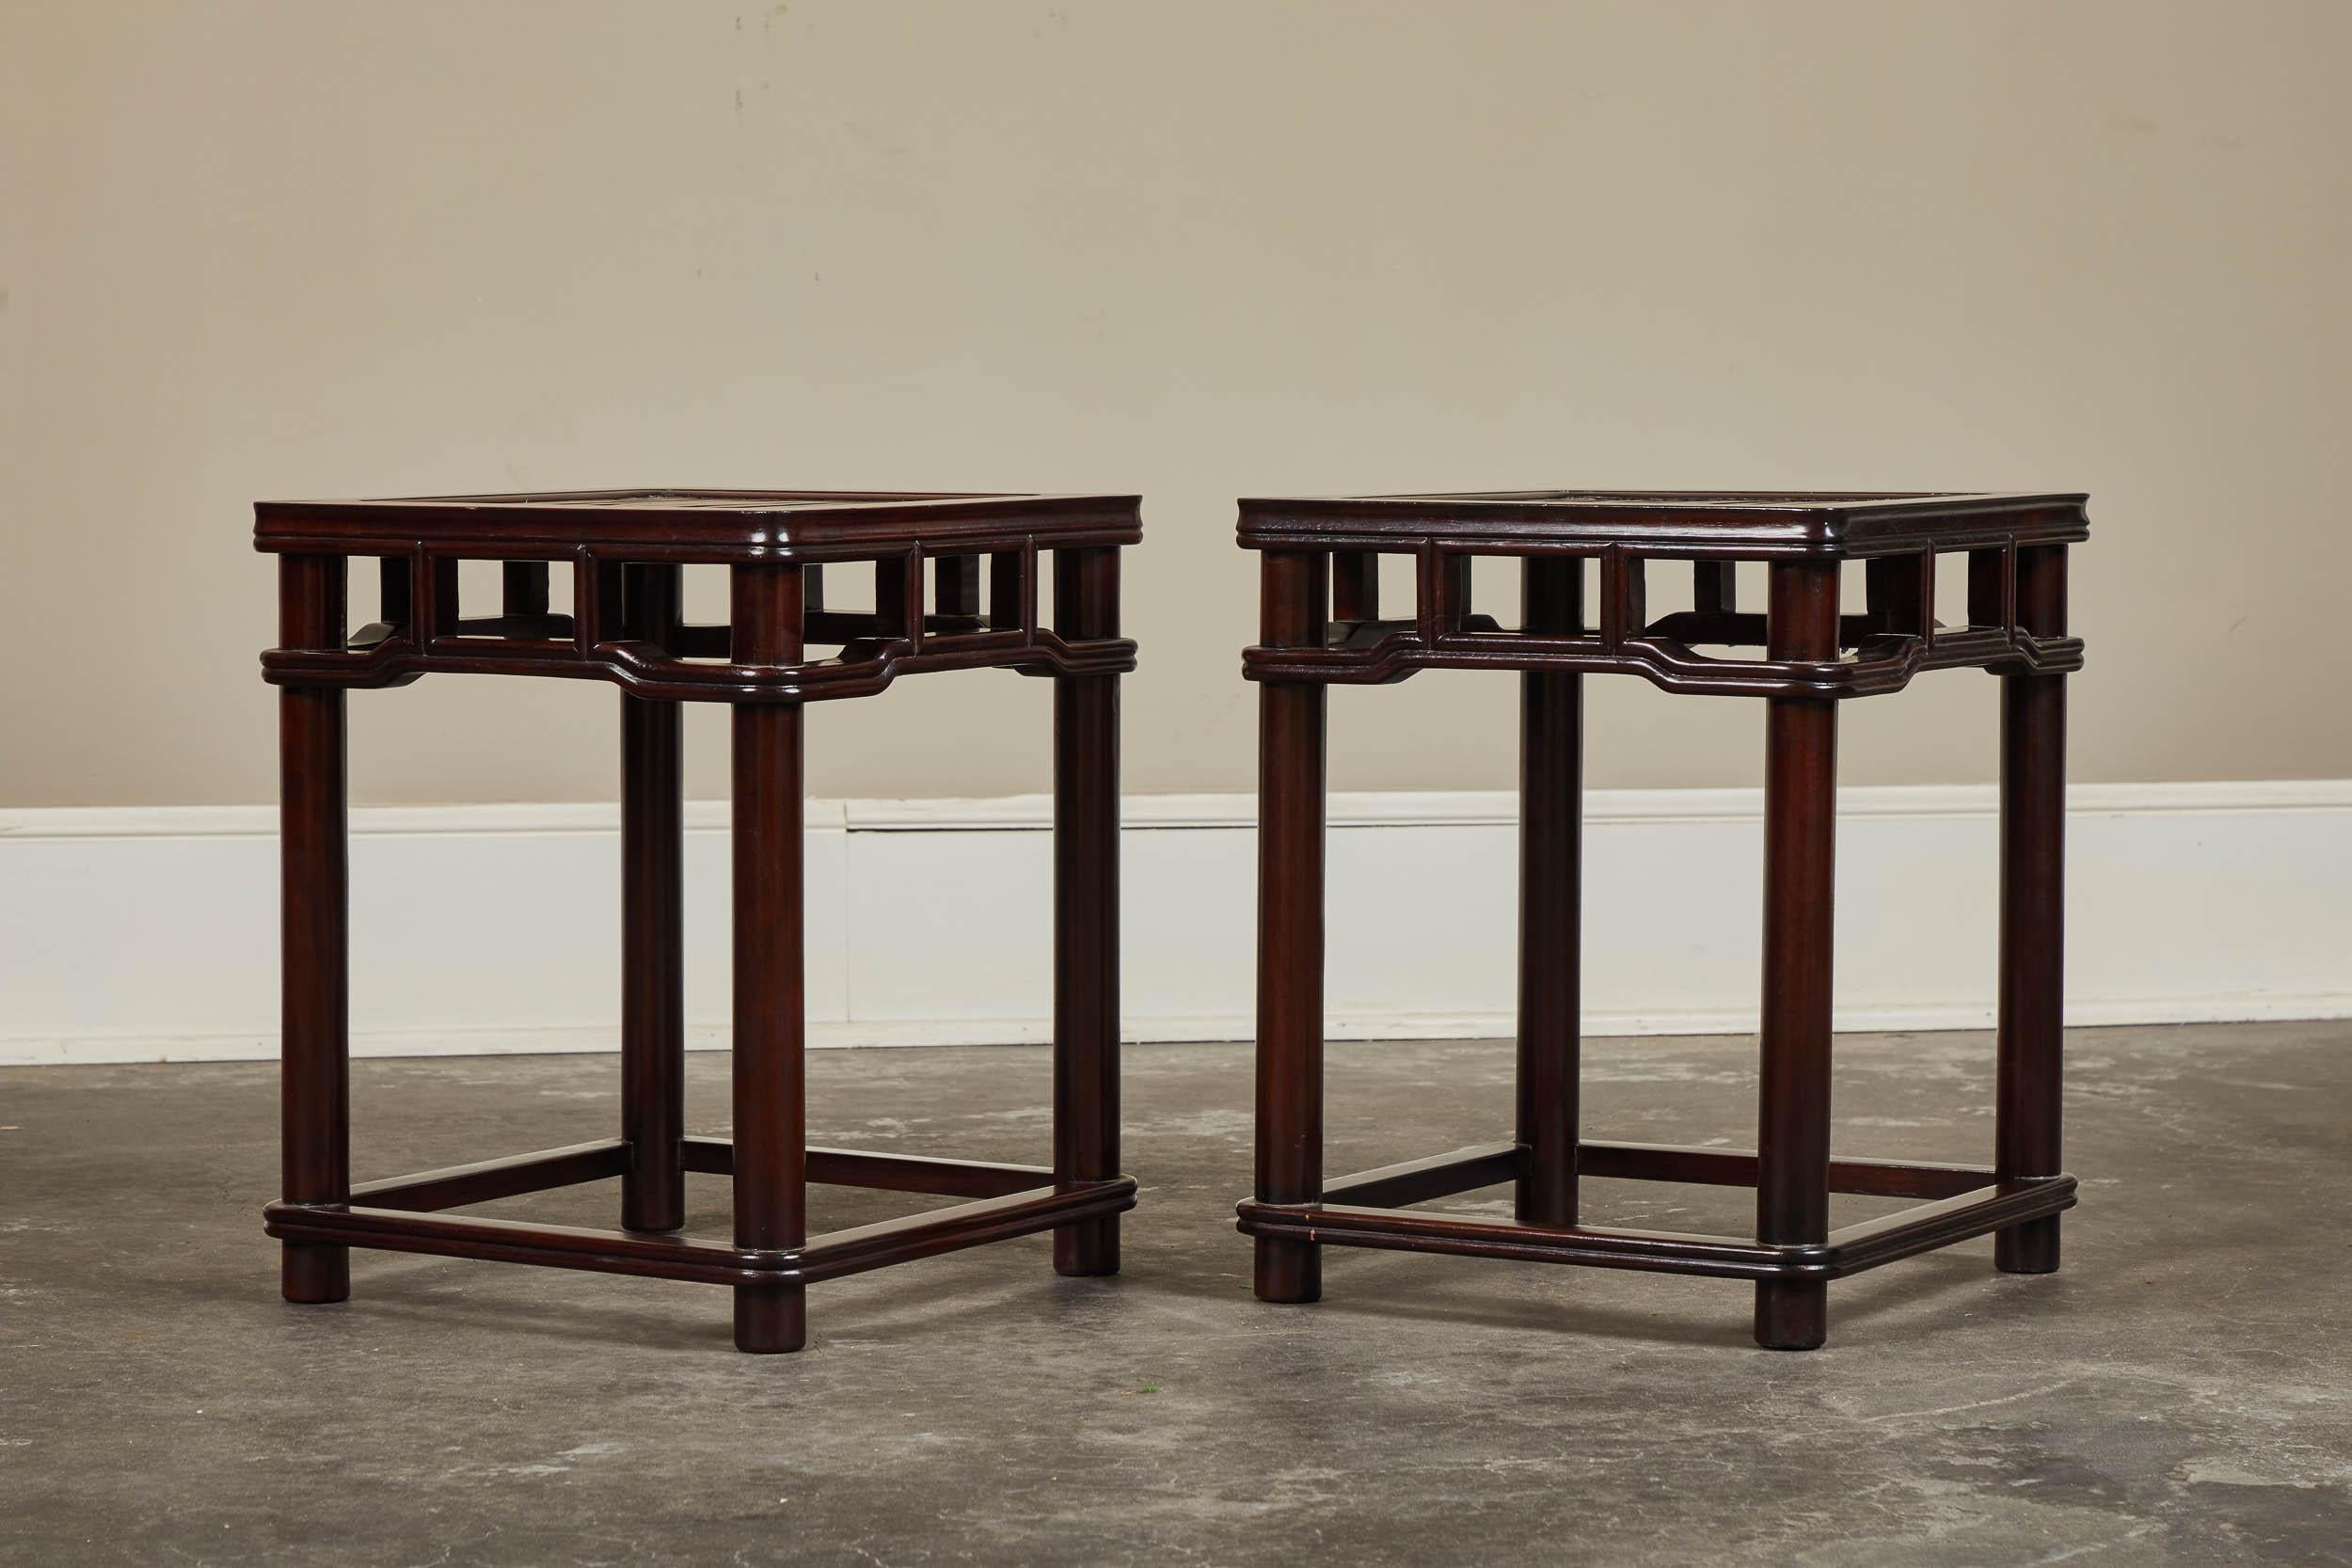 A handsome pair of newly made 18th century bamboo tea tables comprised of iron wood and a bamboo slat top.